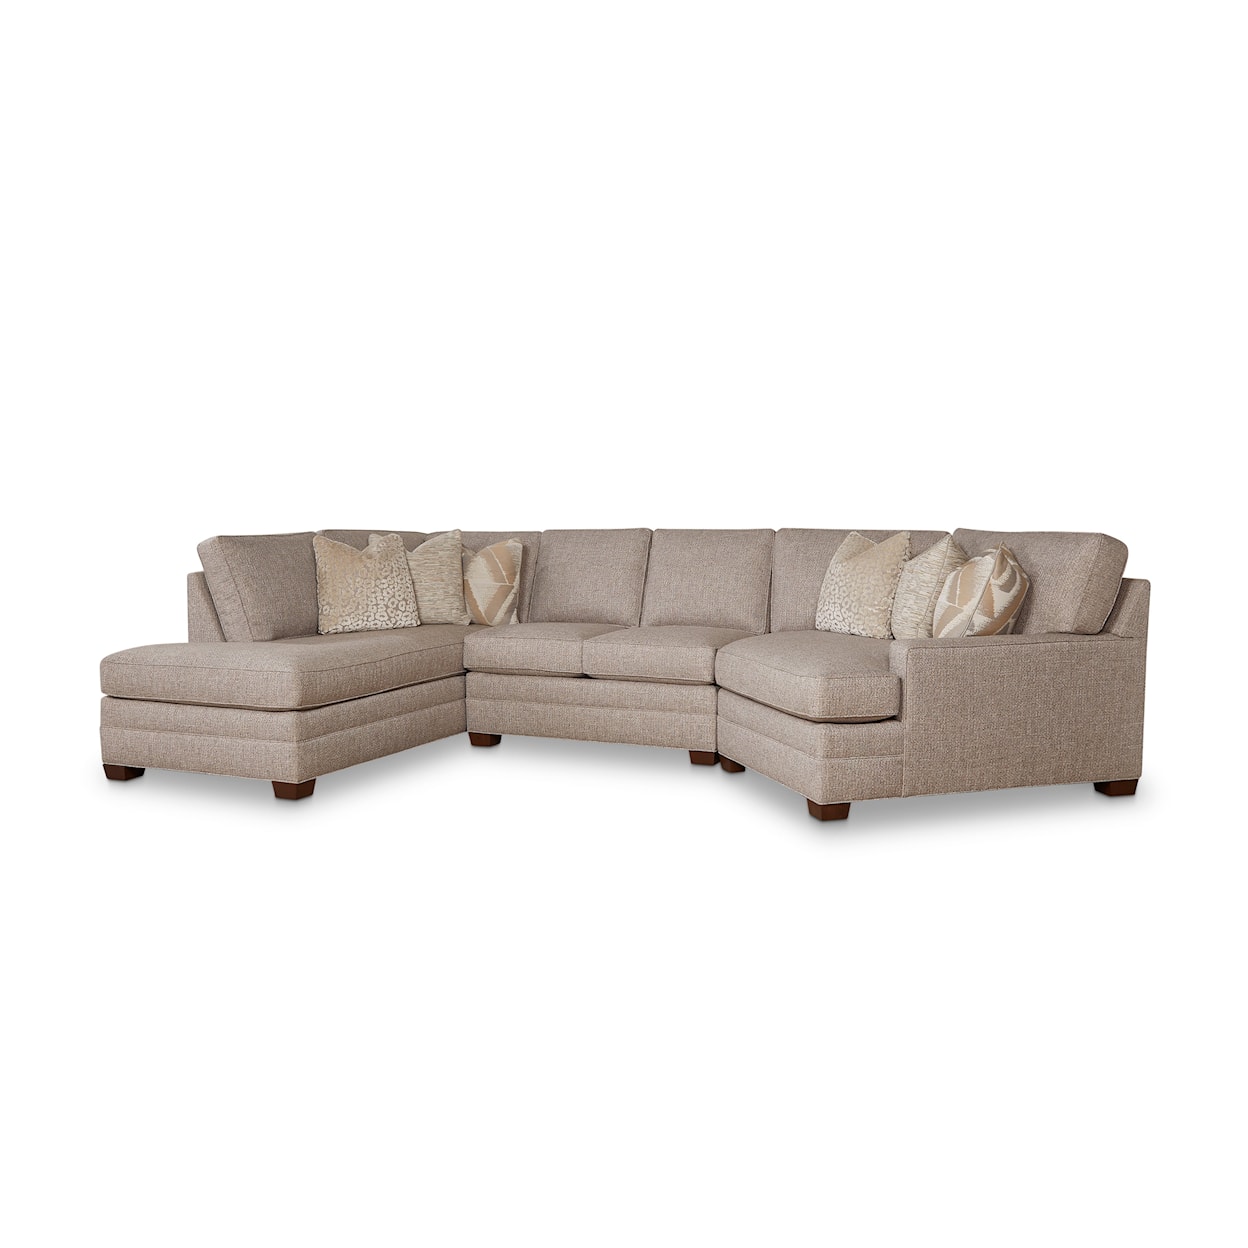 Huntington House 2062 4-Seat Sectional Sofa with Cuddler Chaise